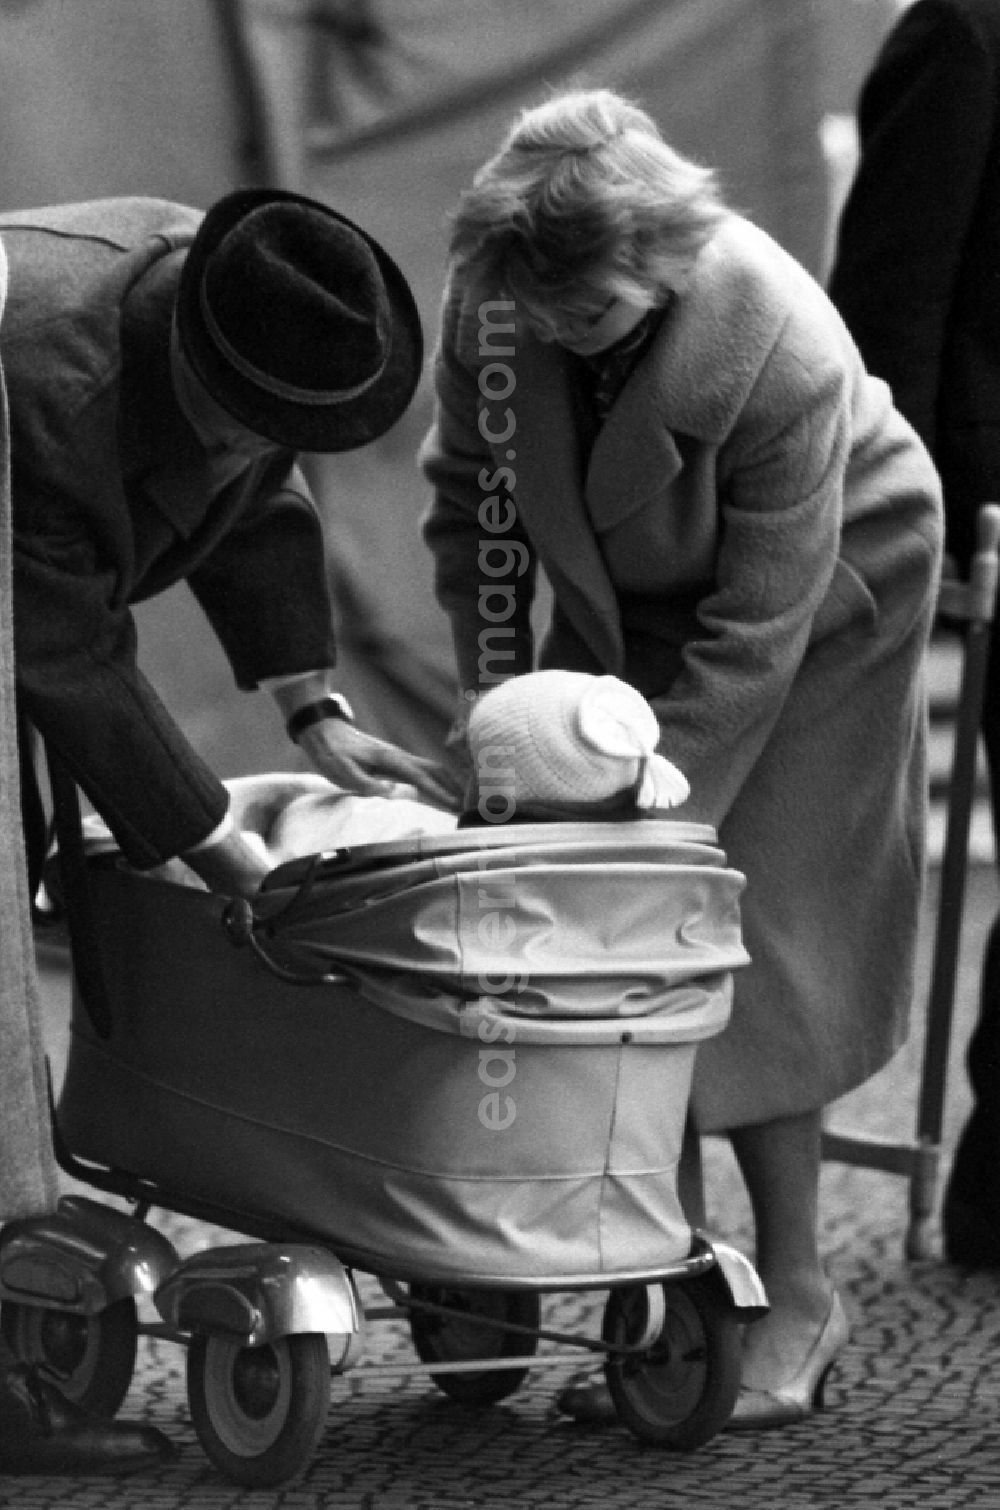 GDR picture archive: Berlin - Parents care for their child in a stroller in East Berlin in the territory of the former GDR, German Democratic Republic